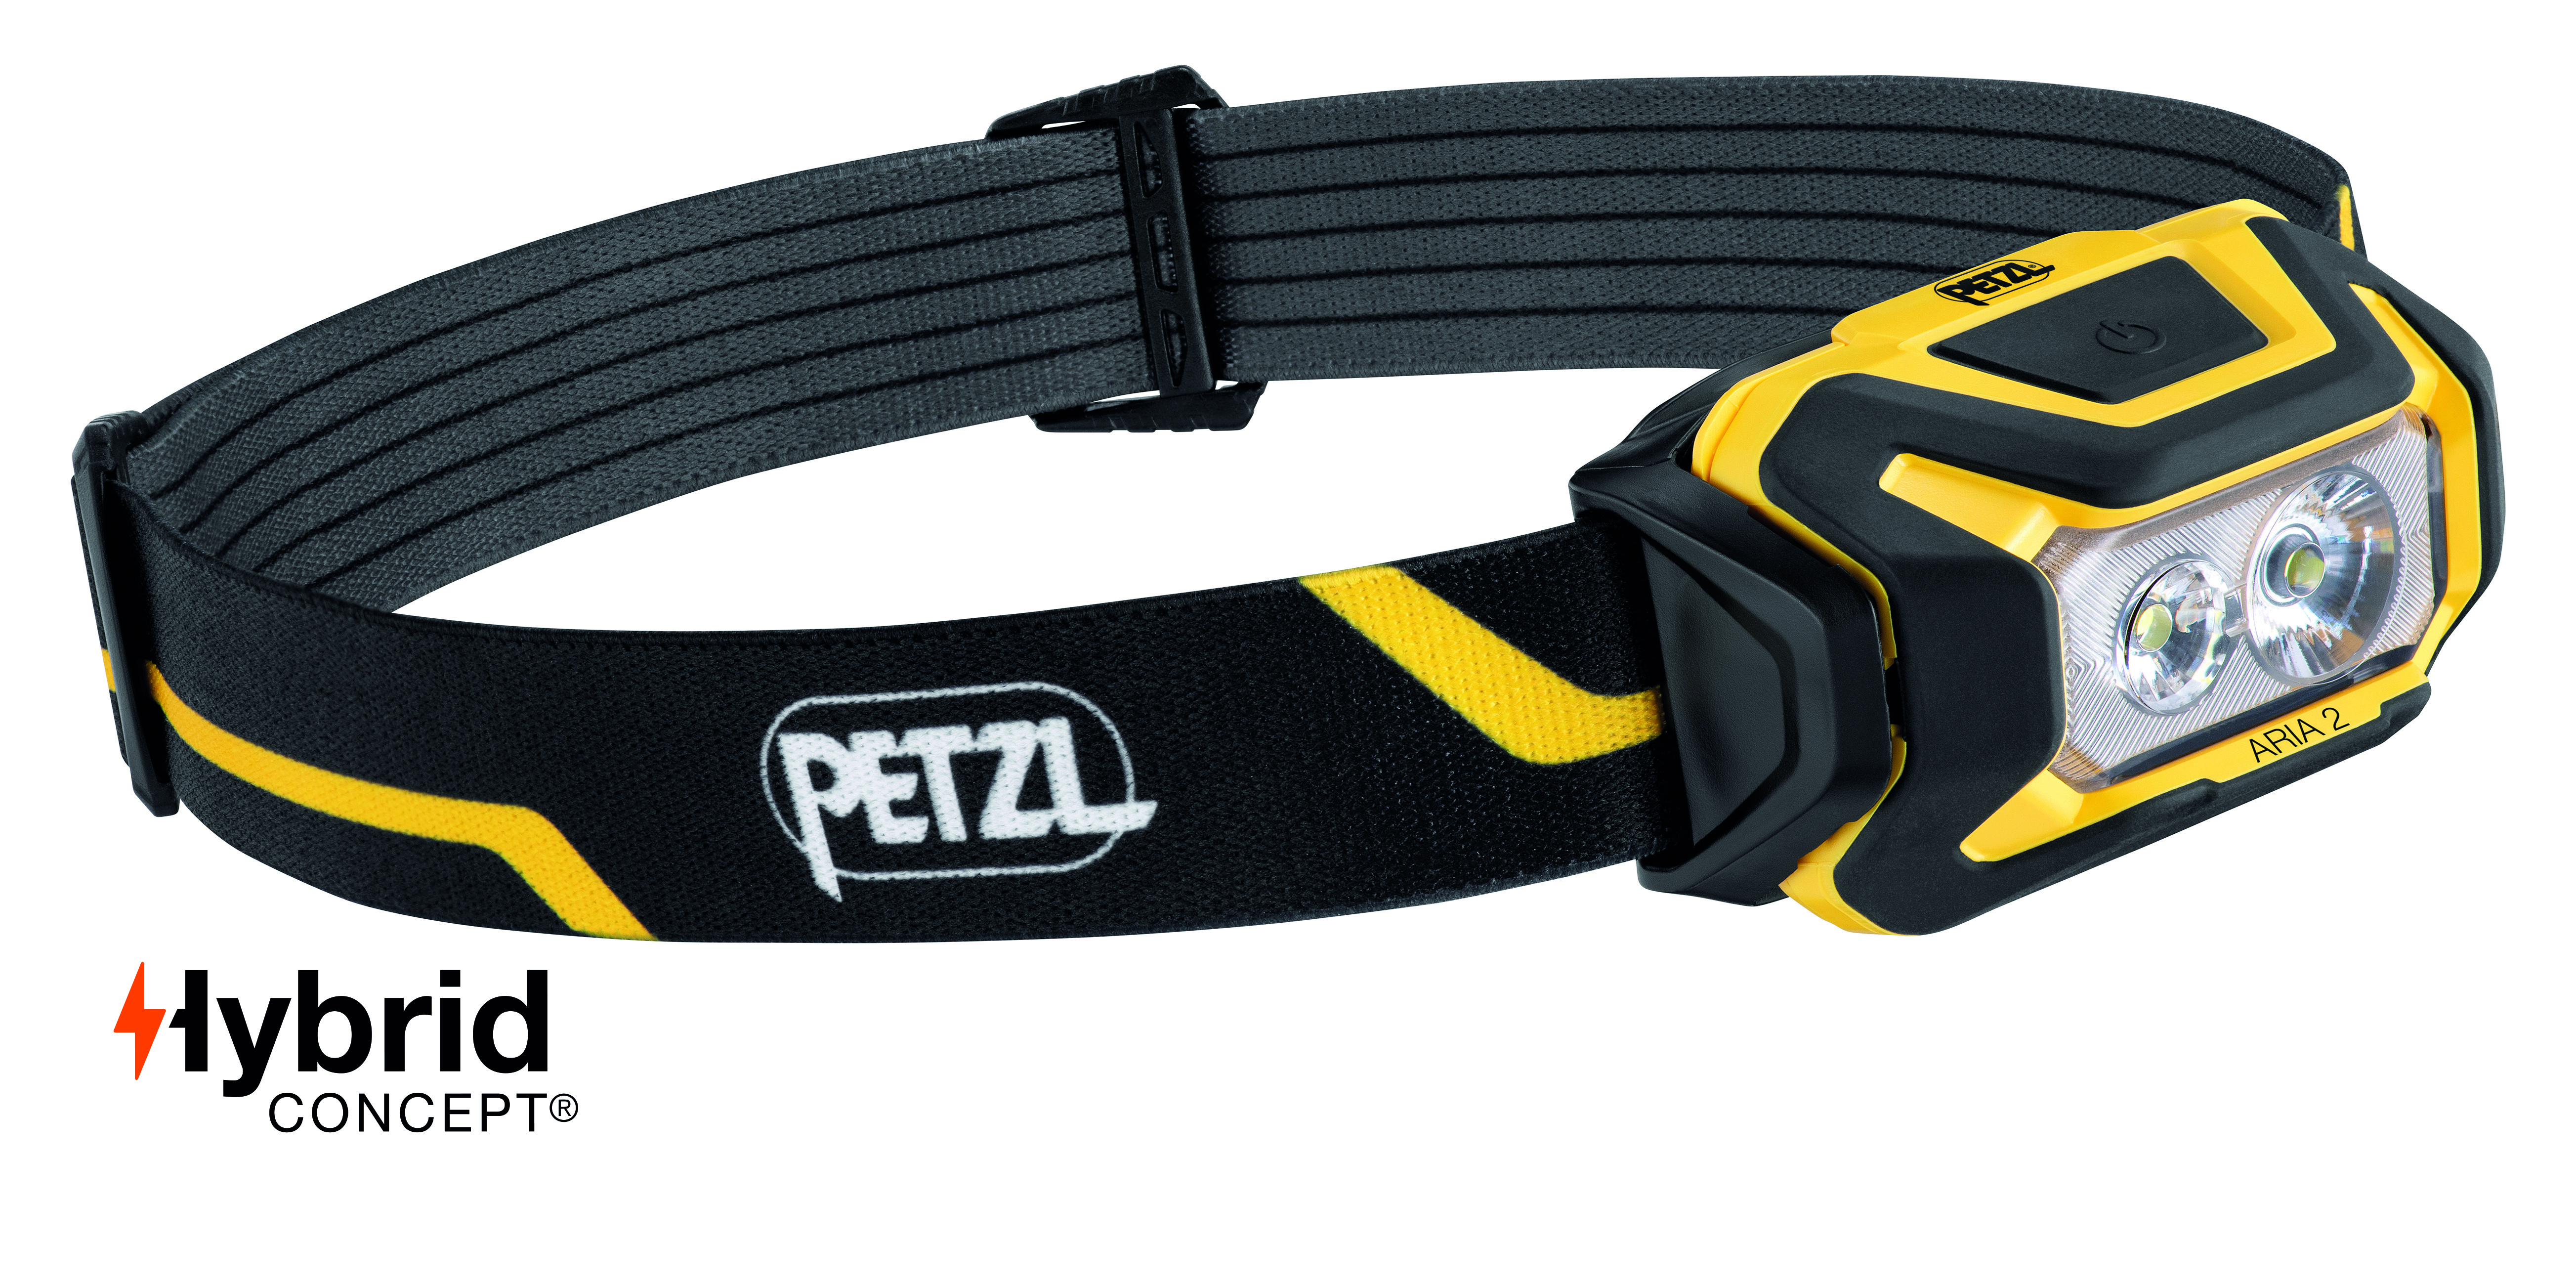 Petzl ARIA 2 Compact Headlamp from GME Supply